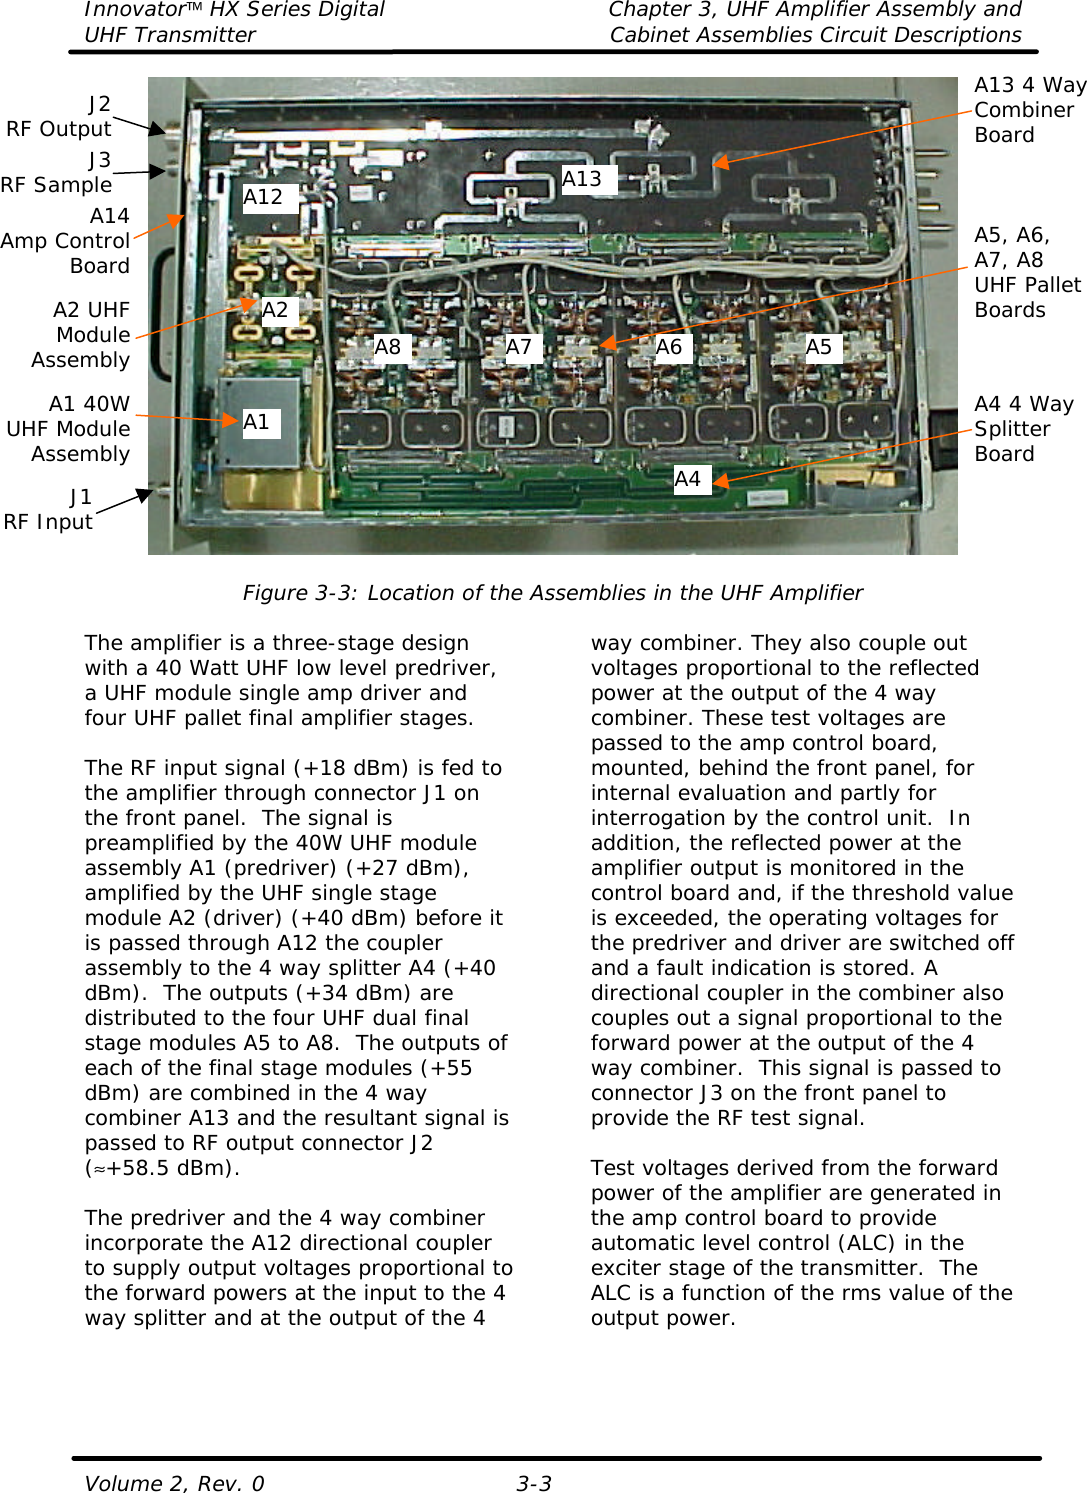 Innovator HX Series Digital Chapter 3, UHF Amplifier Assembly and UHF Transmitter Cabinet Assemblies Circuit Descriptions  Volume 2, Rev. 0 3-3   Figure 3-3: Location of the Assemblies in the UHF Amplifier  The amplifier is a three-stage design with a 40 Watt UHF low level predriver, a UHF module single amp driver and four UHF pallet final amplifier stages.  The RF input signal (+18 dBm) is fed to the amplifier through connector J1 on the front panel.  The signal is preamplified by the 40W UHF module assembly A1 (predriver) (+27 dBm), amplified by the UHF single stage module A2 (driver) (+40 dBm) before it is passed through A12 the coupler assembly to the 4 way splitter A4 (+40 dBm).  The outputs (+34 dBm) are distributed to the four UHF dual final stage modules A5 to A8.  The outputs of each of the final stage modules (+55 dBm) are combined in the 4 way combiner A13 and the resultant signal is passed to RF output connector J2 (≈+58.5 dBm).  The predriver and the 4 way combiner incorporate the A12 directional coupler to supply output voltages proportional to the forward powers at the input to the 4 way splitter and at the output of the 4 way combiner. They also couple out voltages proportional to the reflected power at the output of the 4 way combiner. These test voltages are passed to the amp control board, mounted, behind the front panel, for internal evaluation and partly for interrogation by the control unit.  In addition, the reflected power at the amplifier output is monitored in the control board and, if the threshold value is exceeded, the operating voltages for the predriver and driver are switched off and a fault indication is stored. A directional coupler in the combiner also couples out a signal proportional to the forward power at the output of the 4 way combiner.  This signal is passed to connector J3 on the front panel to provide the RF test signal.  Test voltages derived from the forward power of the amplifier are generated in the amp control board to provide automatic level control (ALC) in the exciter stage of the transmitter.  The ALC is a function of the rms value of the output power.A13 4 Way Combiner Board A8 A7 A6 A5 A5, A6, A7, A8 UHF Pallet Boards A4 4 Way Splitter Board J1RF InputJ2RF OutputA2 UHF Module AssemblyA13 A12 A2 A1 A4 A1 40WUHF Module AssemblyA14Amp Control BoardJ3RF Sample